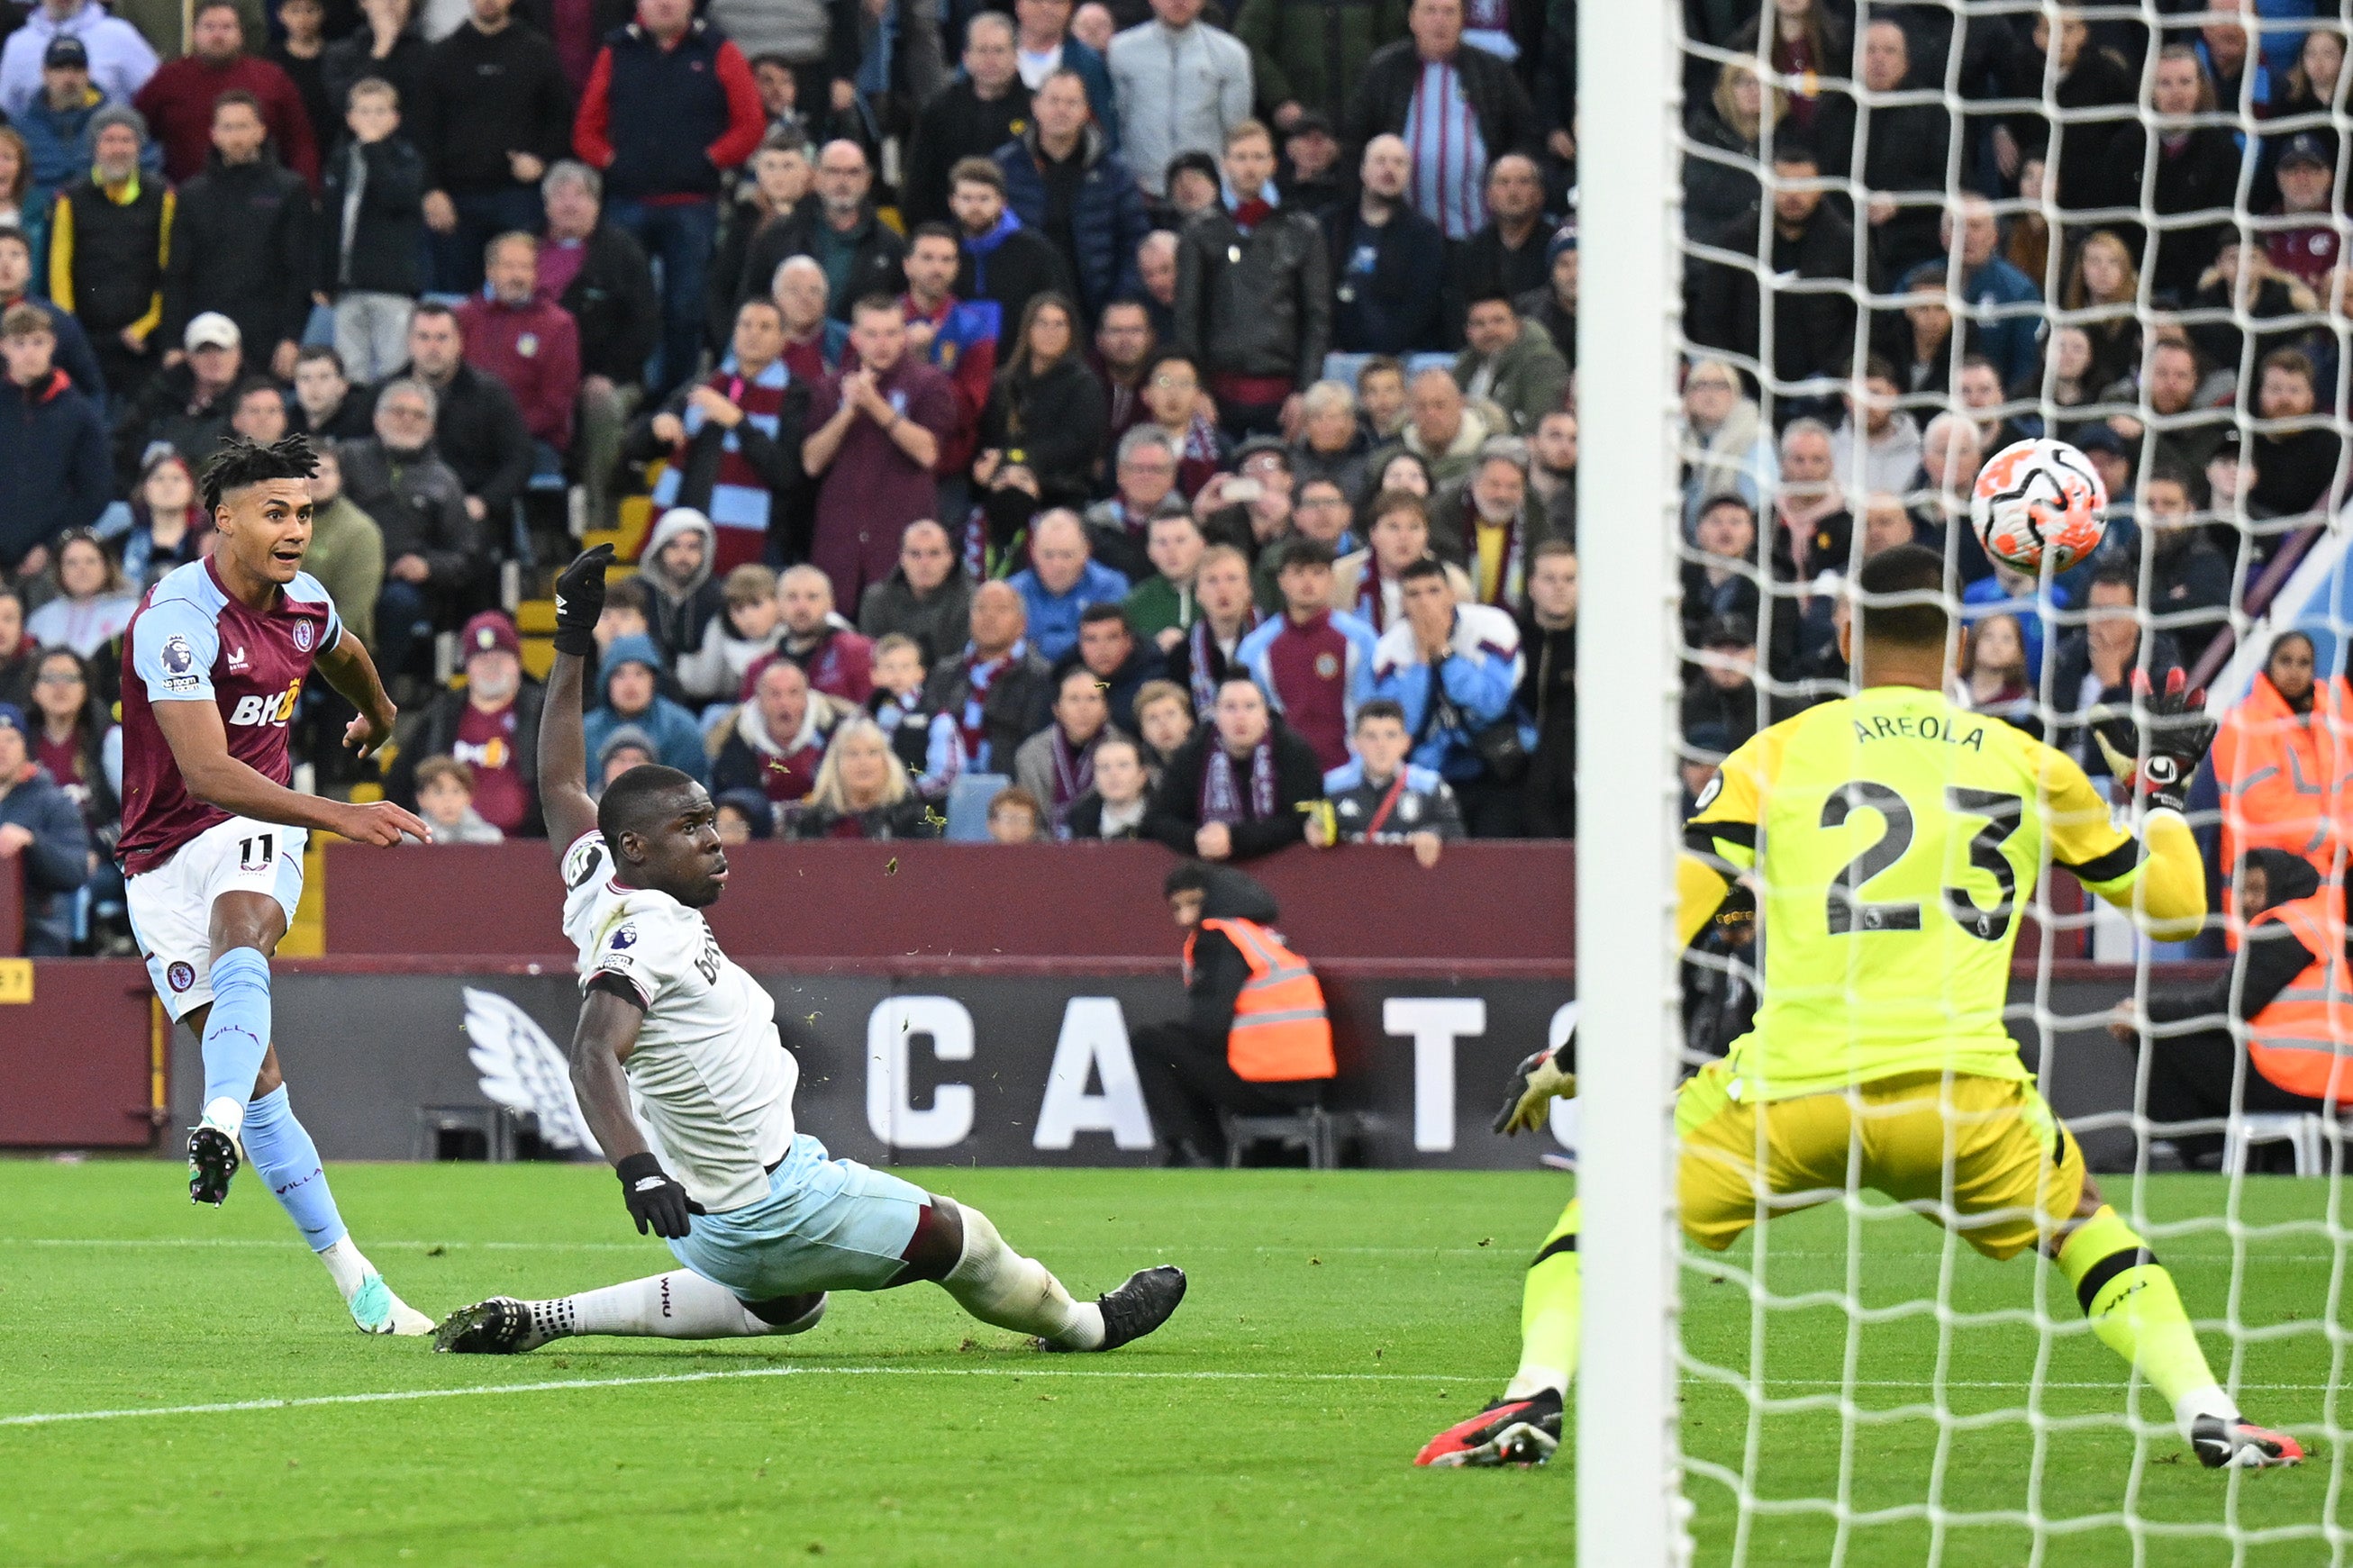 Watkins cracked in Villa’s third after West Ham came back